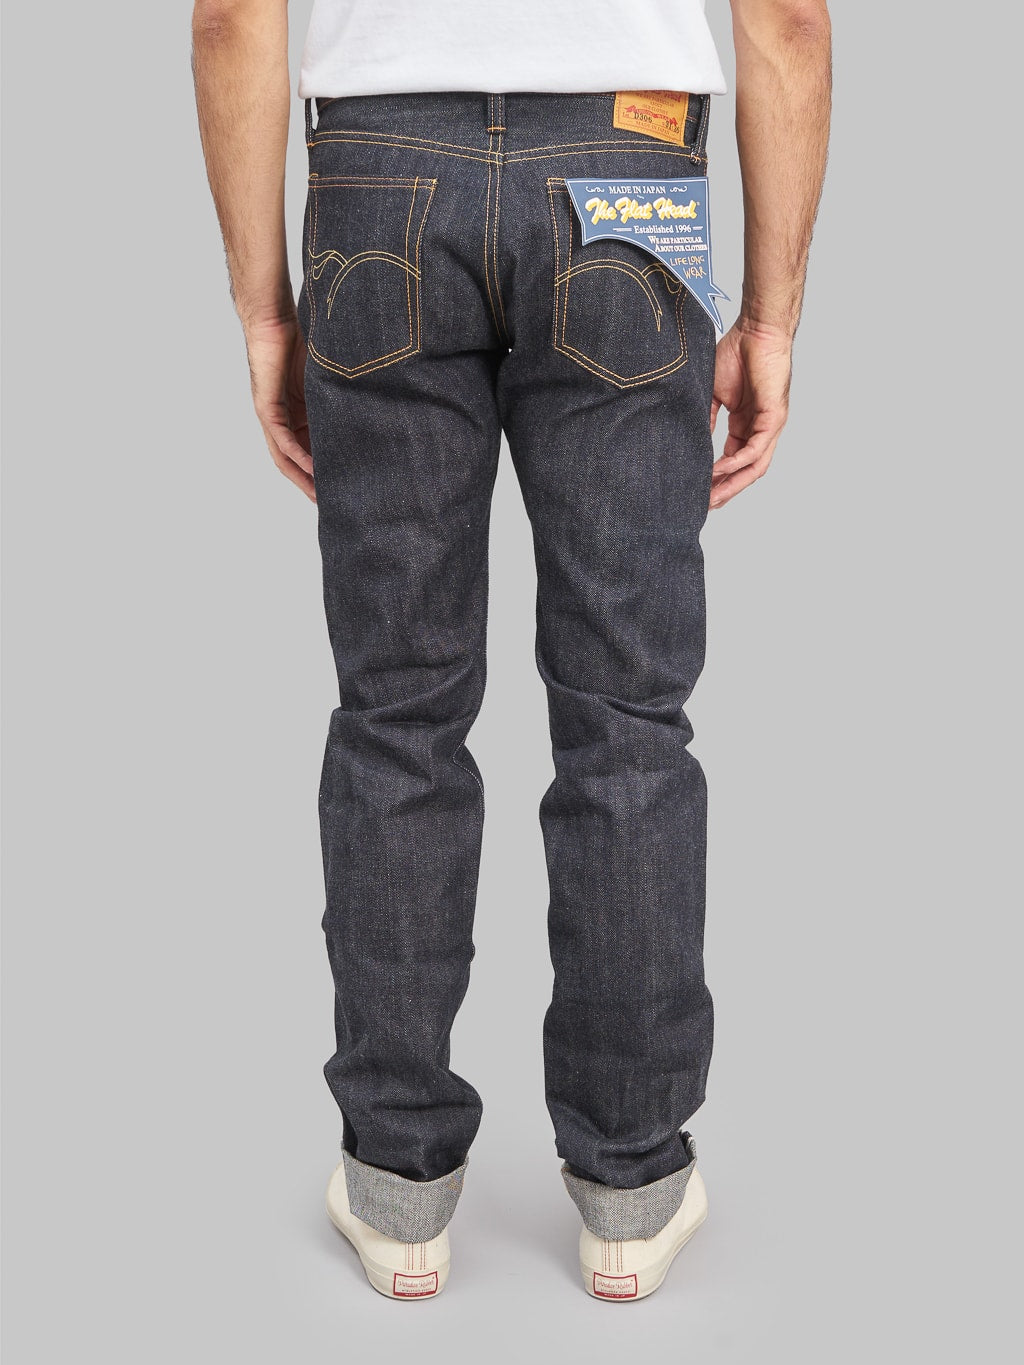 The Flat Head D306 Tight Tapered selvedge Jeans rise